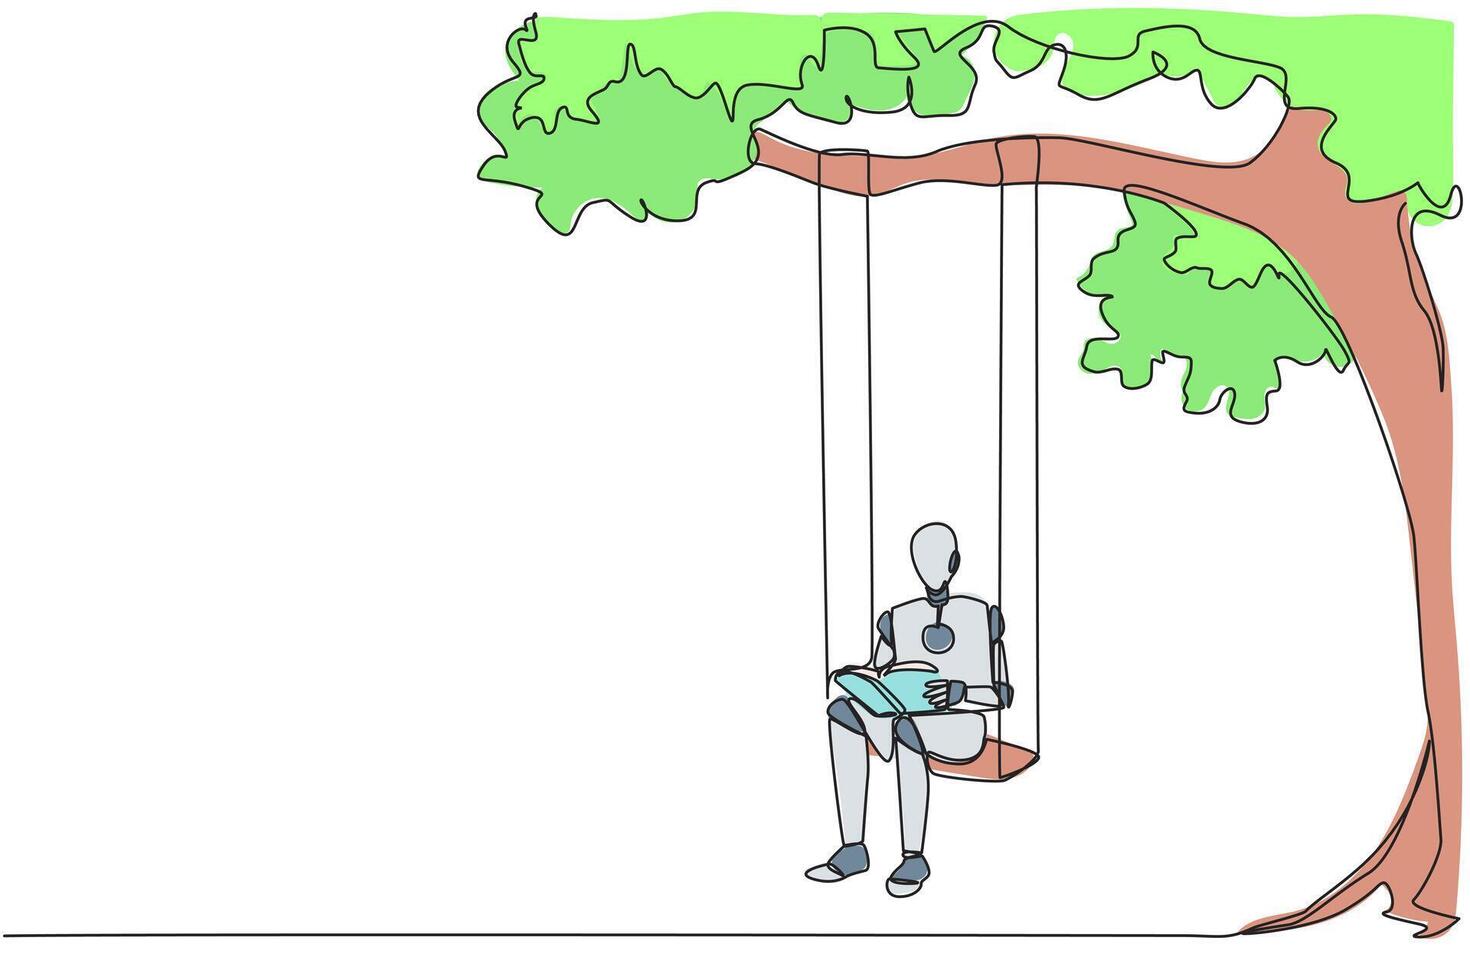 Continuous one line drawing robot sitting on a swing attached to a tree reading a book. Really enjoyed the storyline of the fiction book. Book festival. Single line draw design illustration vector